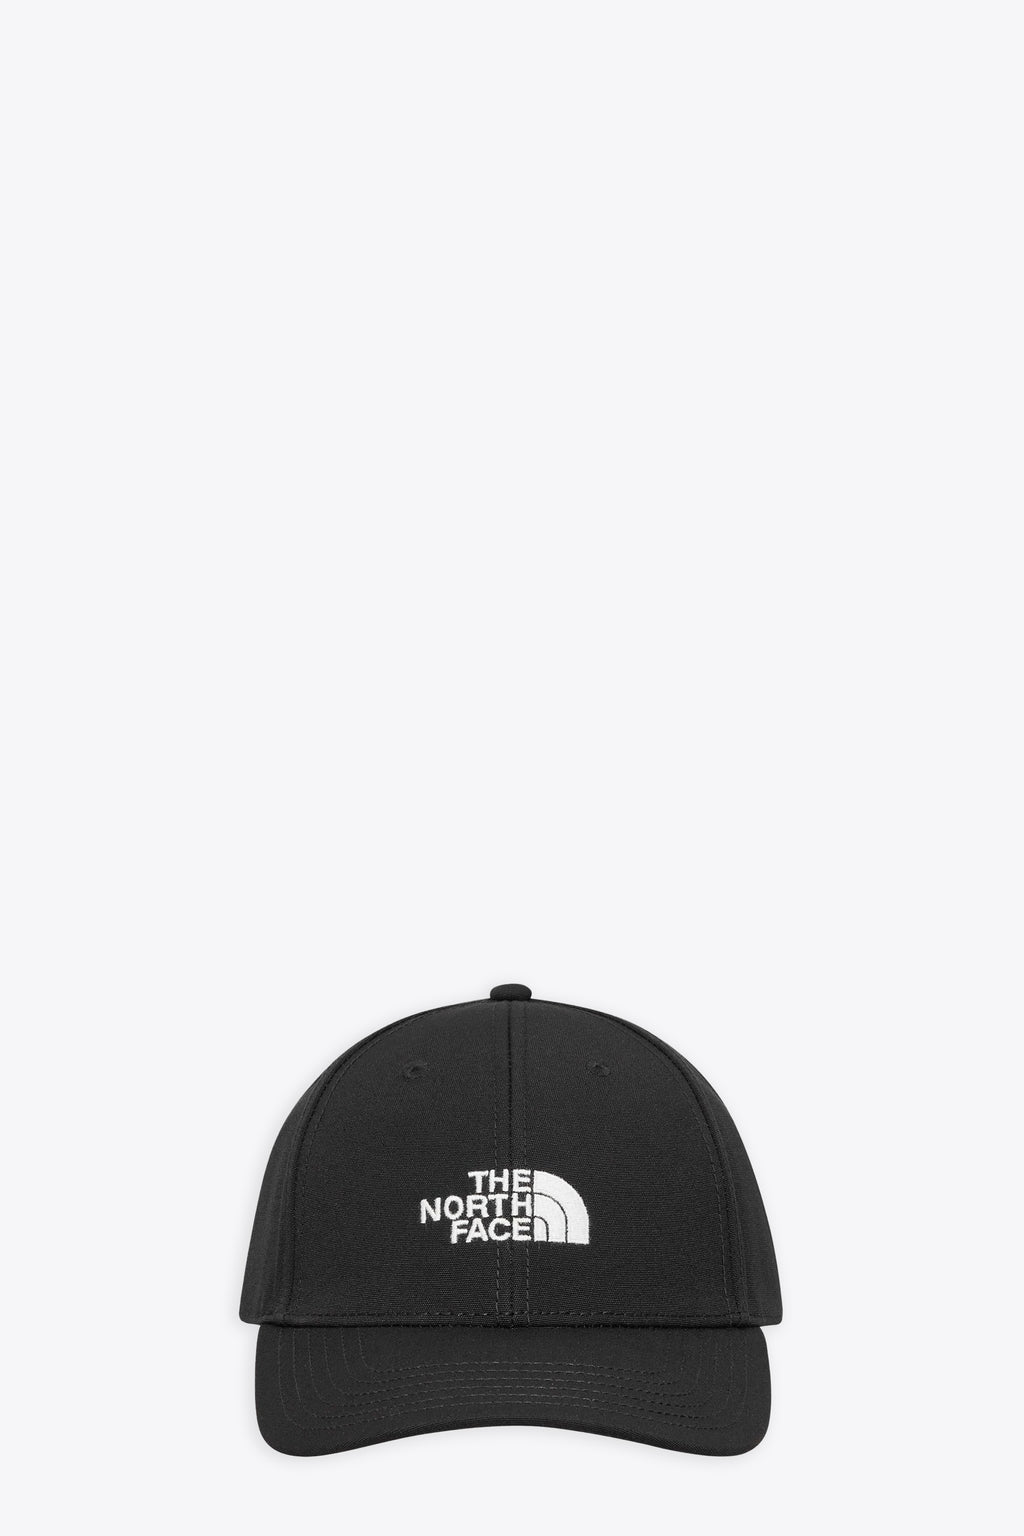 alt-image__Black-baseball-cap-with-front-logo---Recycled-66-Classic-Hat-